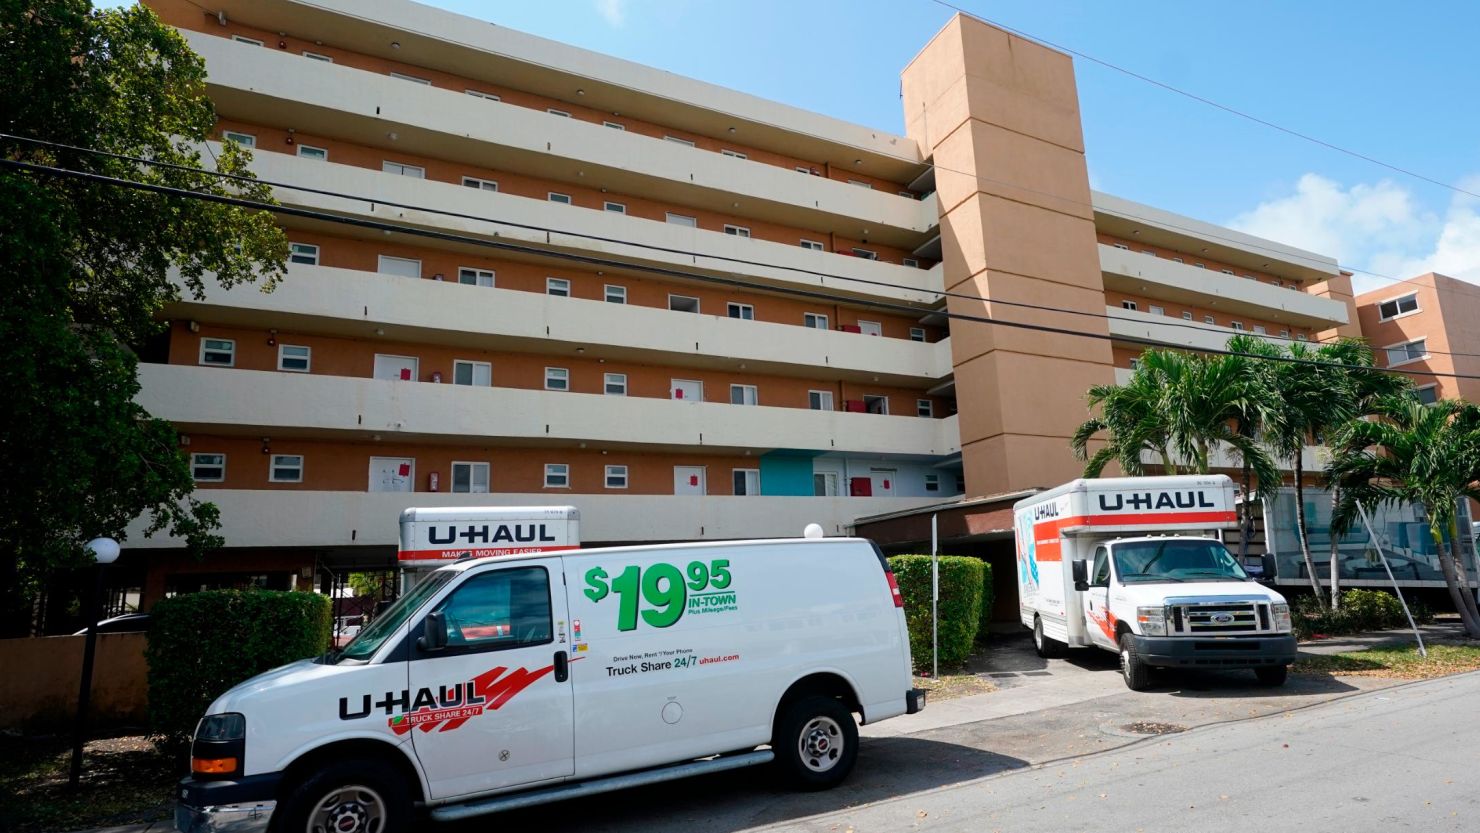 Moving vans and trucks are parked outside the Bayview 60 Homes apartment building in North Miami Beach, Florida, on Tuesday, April 5.